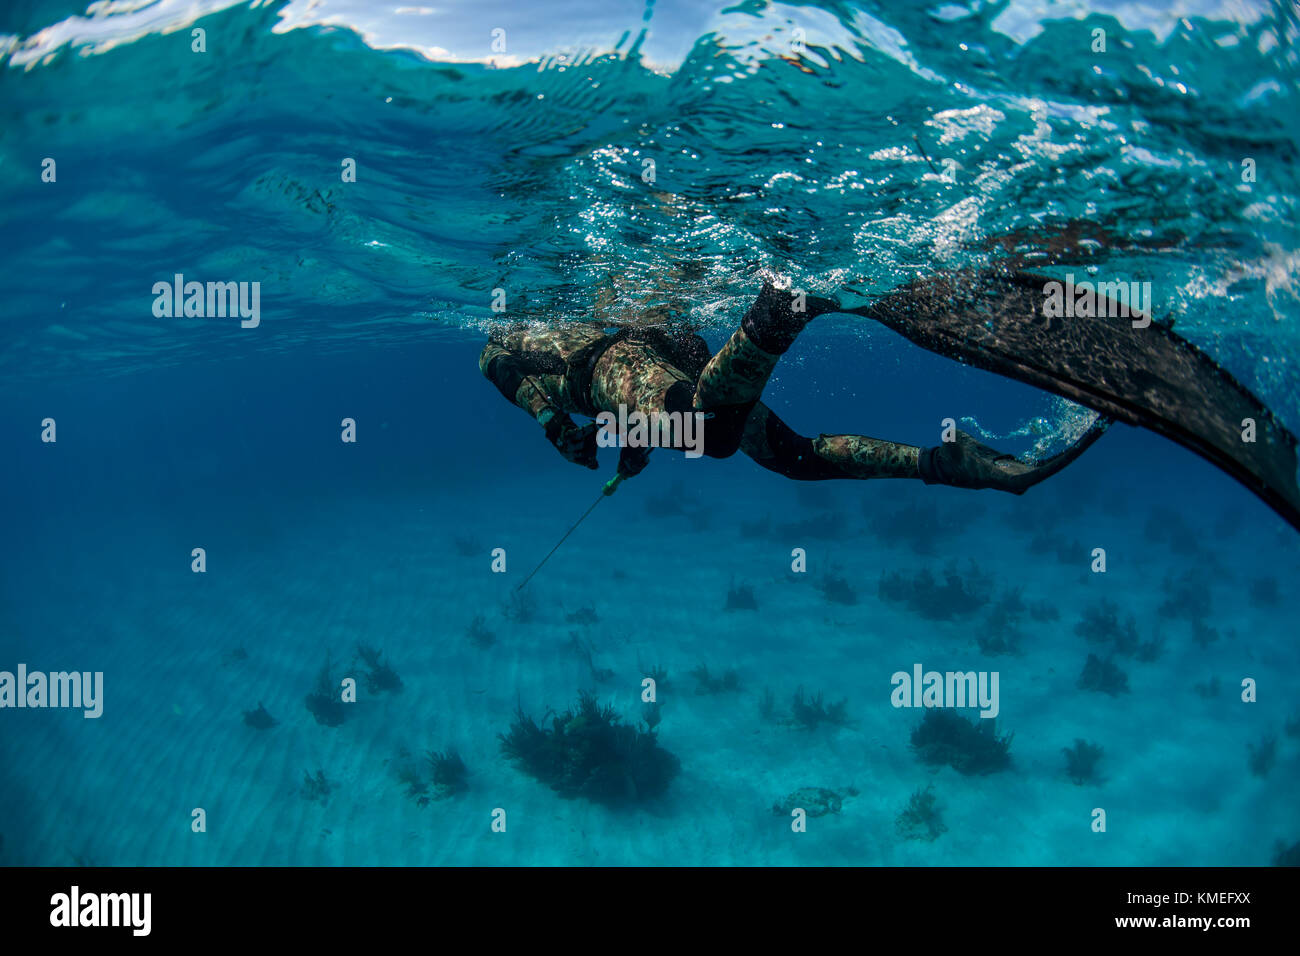 Man swimming underwater while spearfishing in ocean, Clarence Town, Long Island, Bahamas Stock Photo